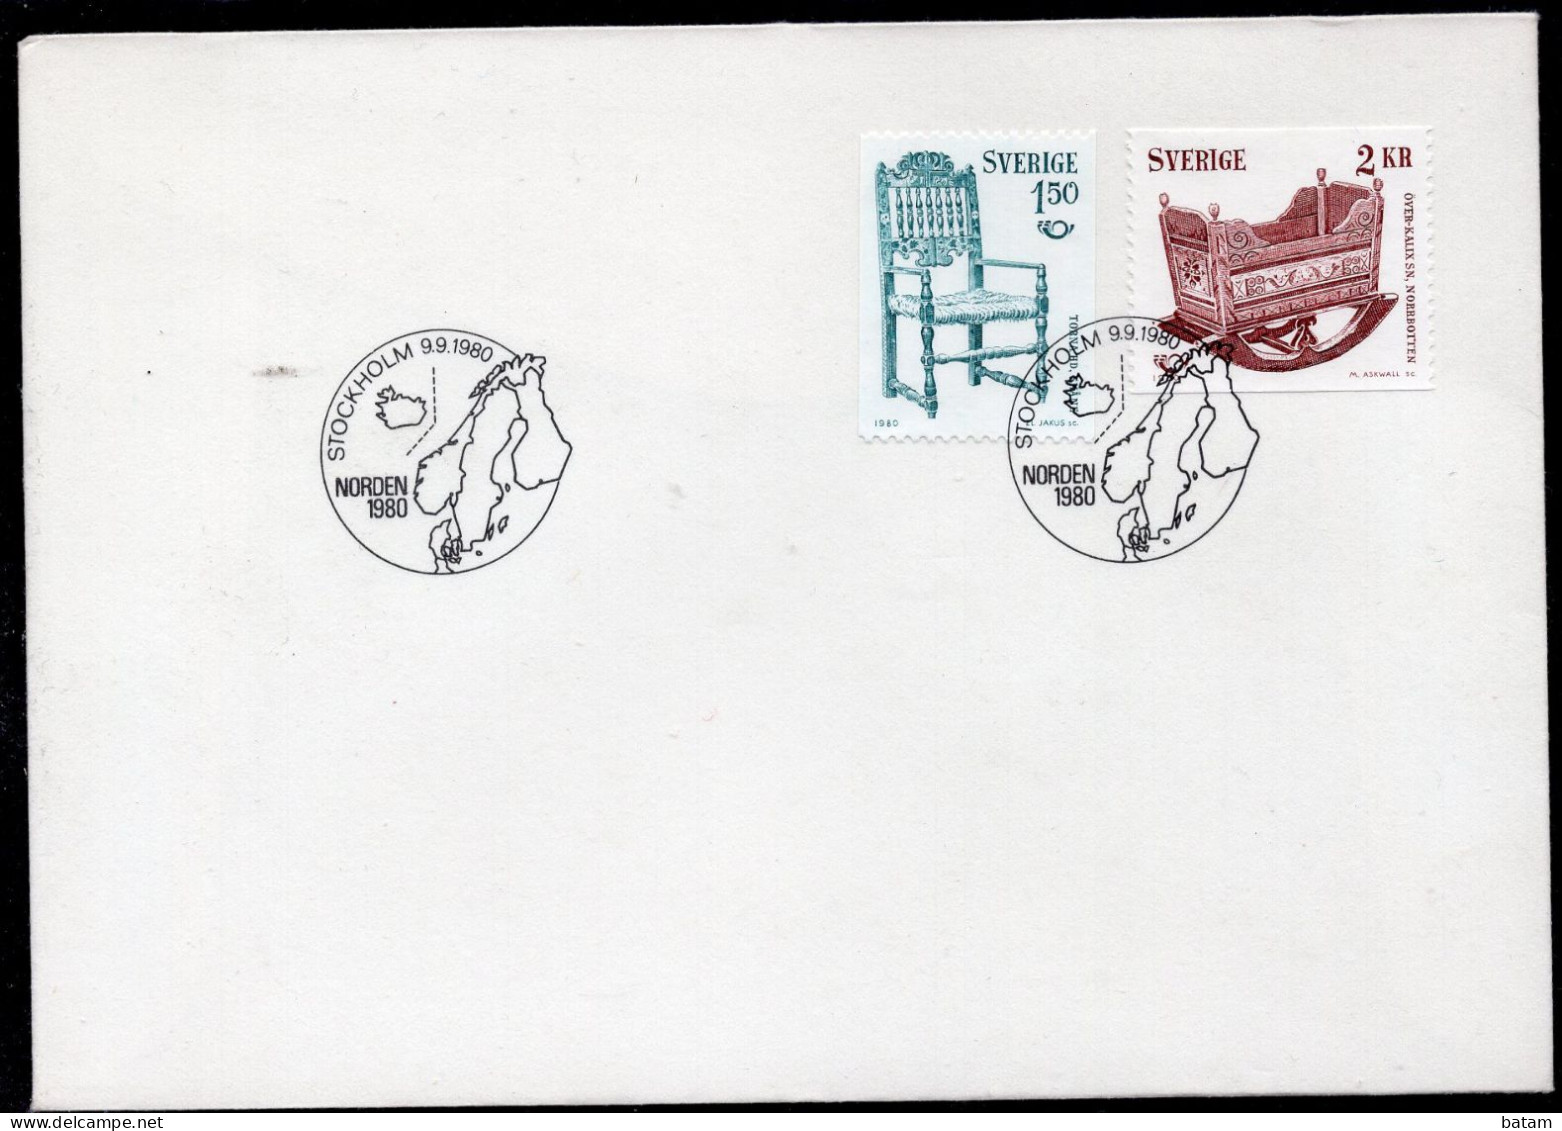 Sweden 1980 - The Nordic Countries - FDC - Briefe U. Dokumente